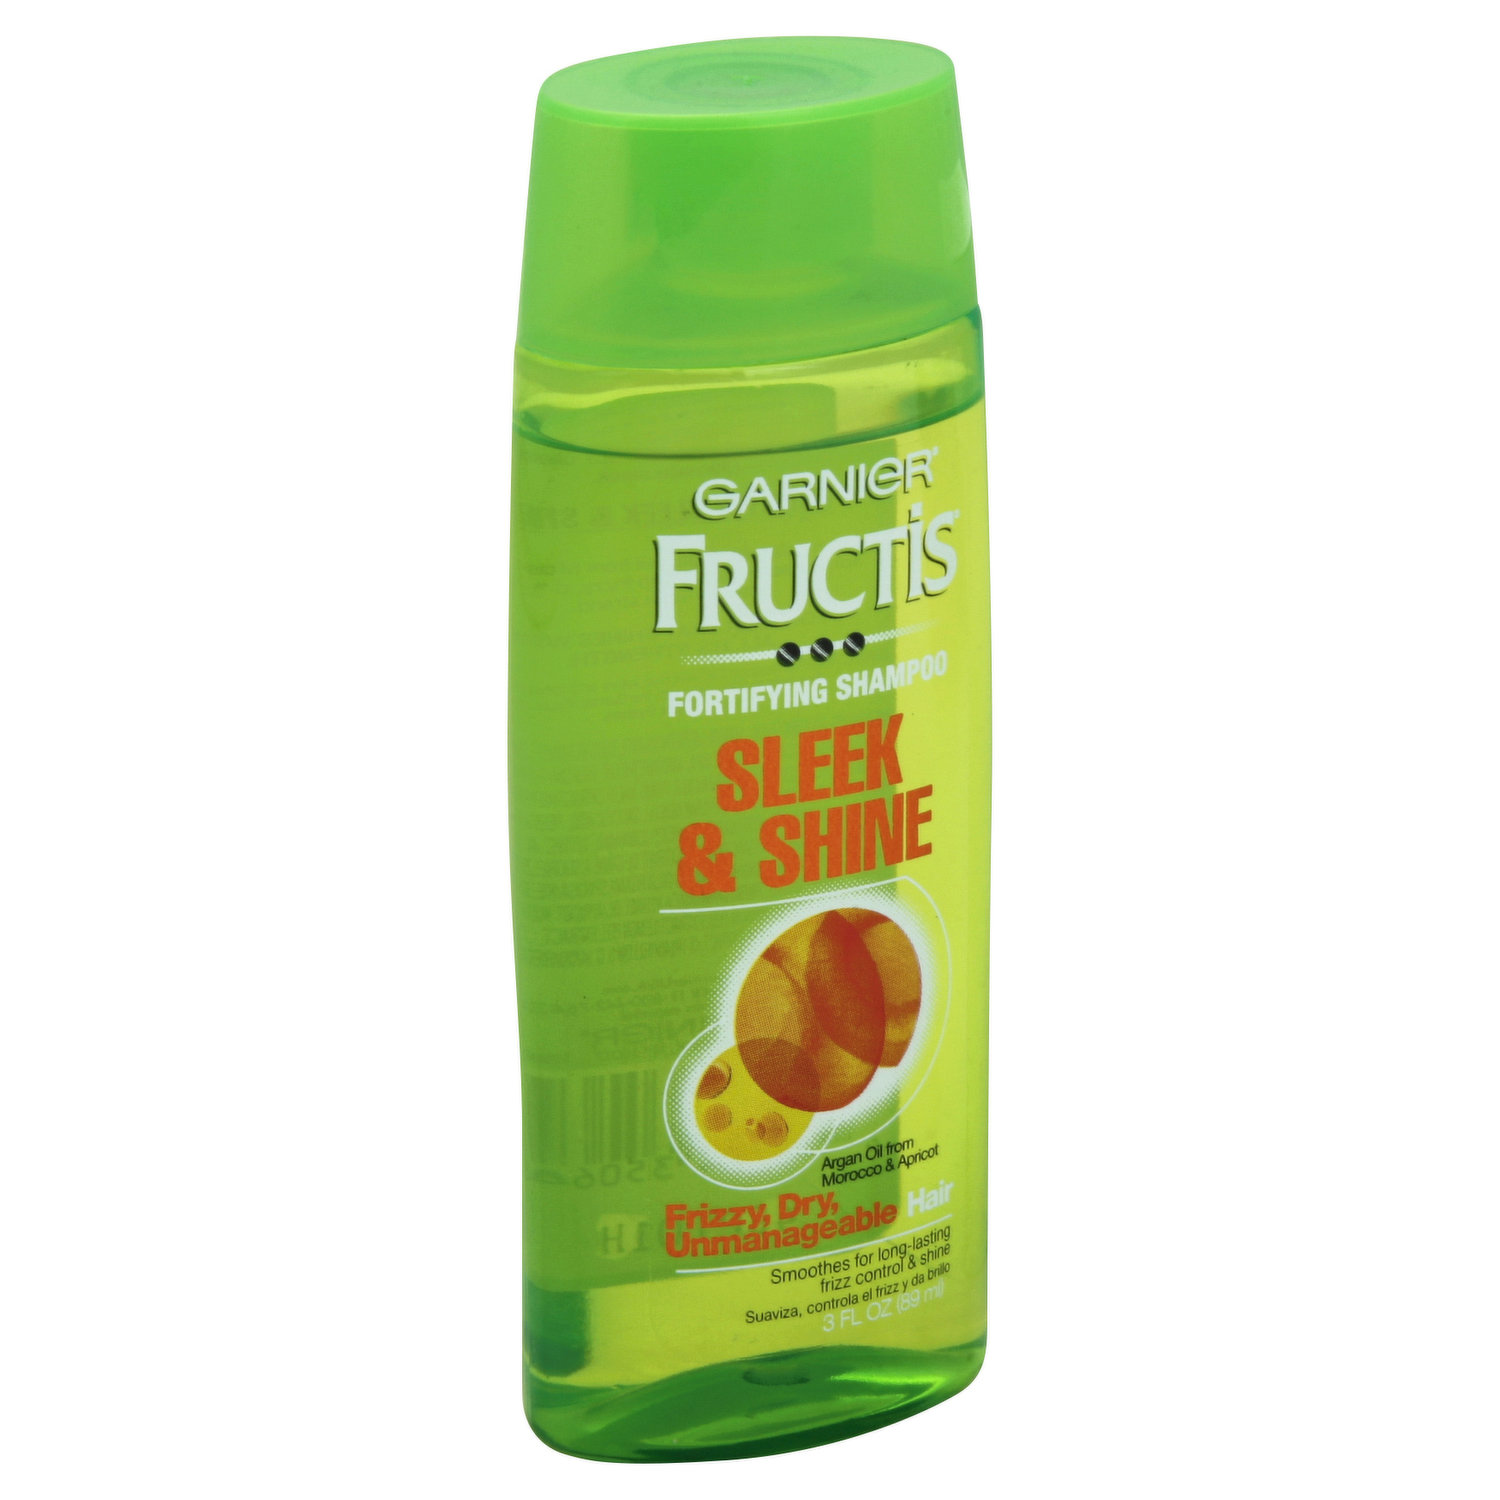 Fortifying, Shampoo, Fructis Shine, Frizzy, & Sleek Dry Unmanageable Hair